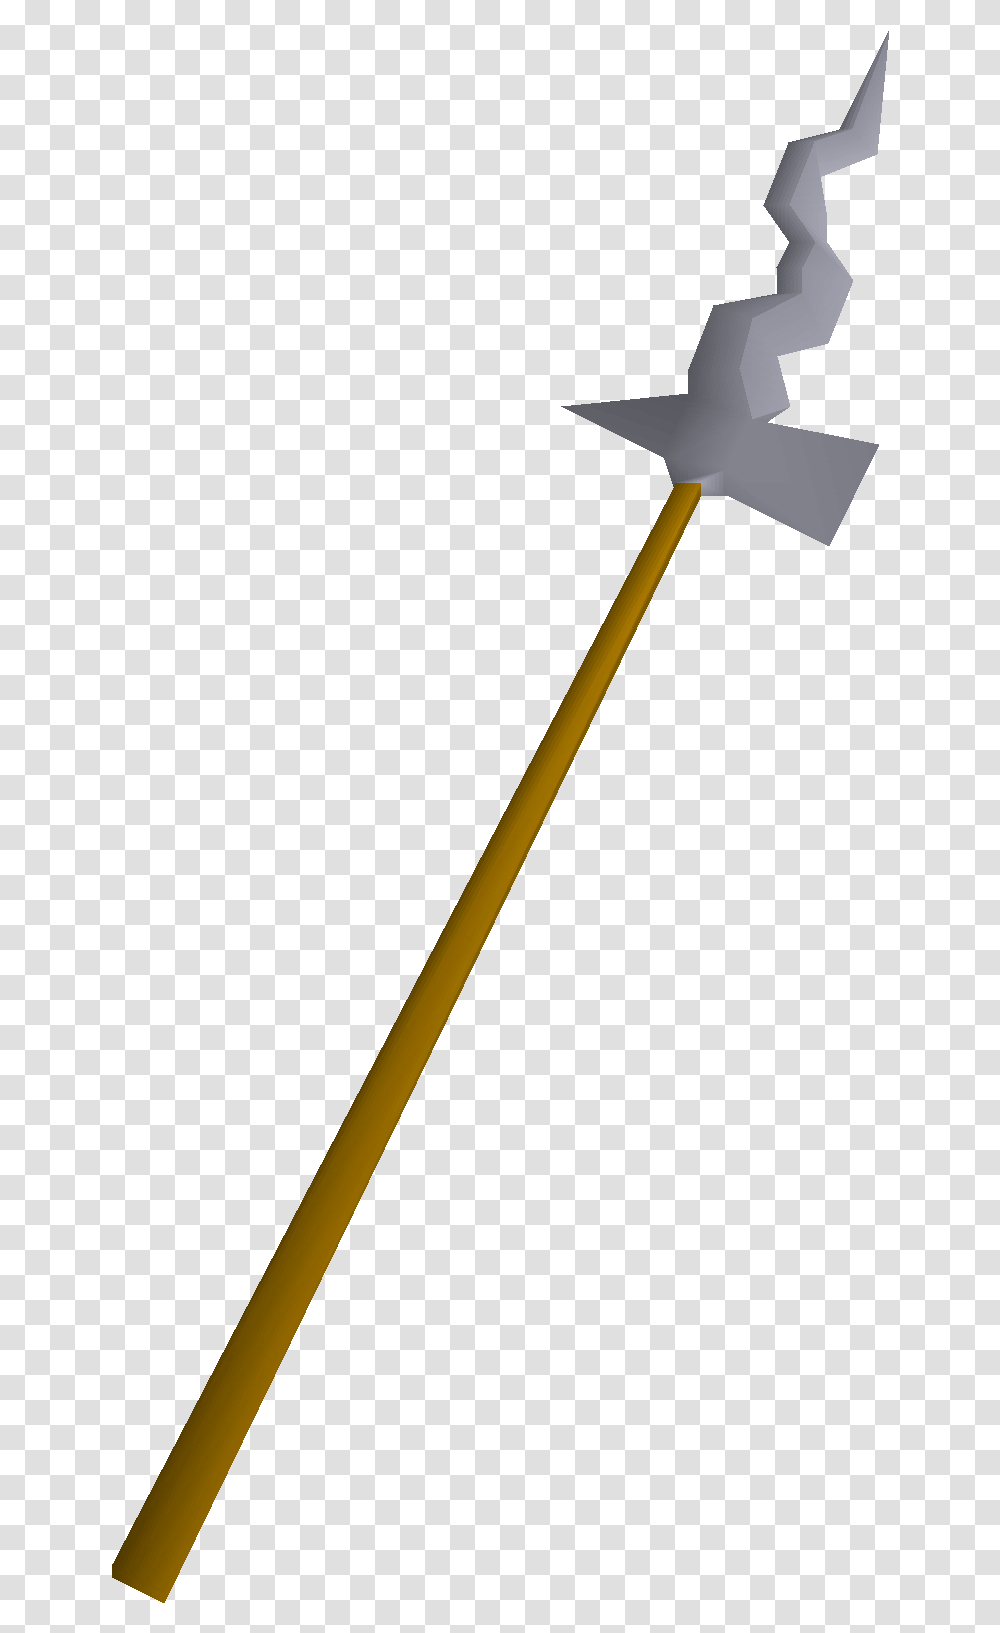 Guthix Mjolnir Airplane, Tool, Weapon, Weaponry, Axe Transparent Png